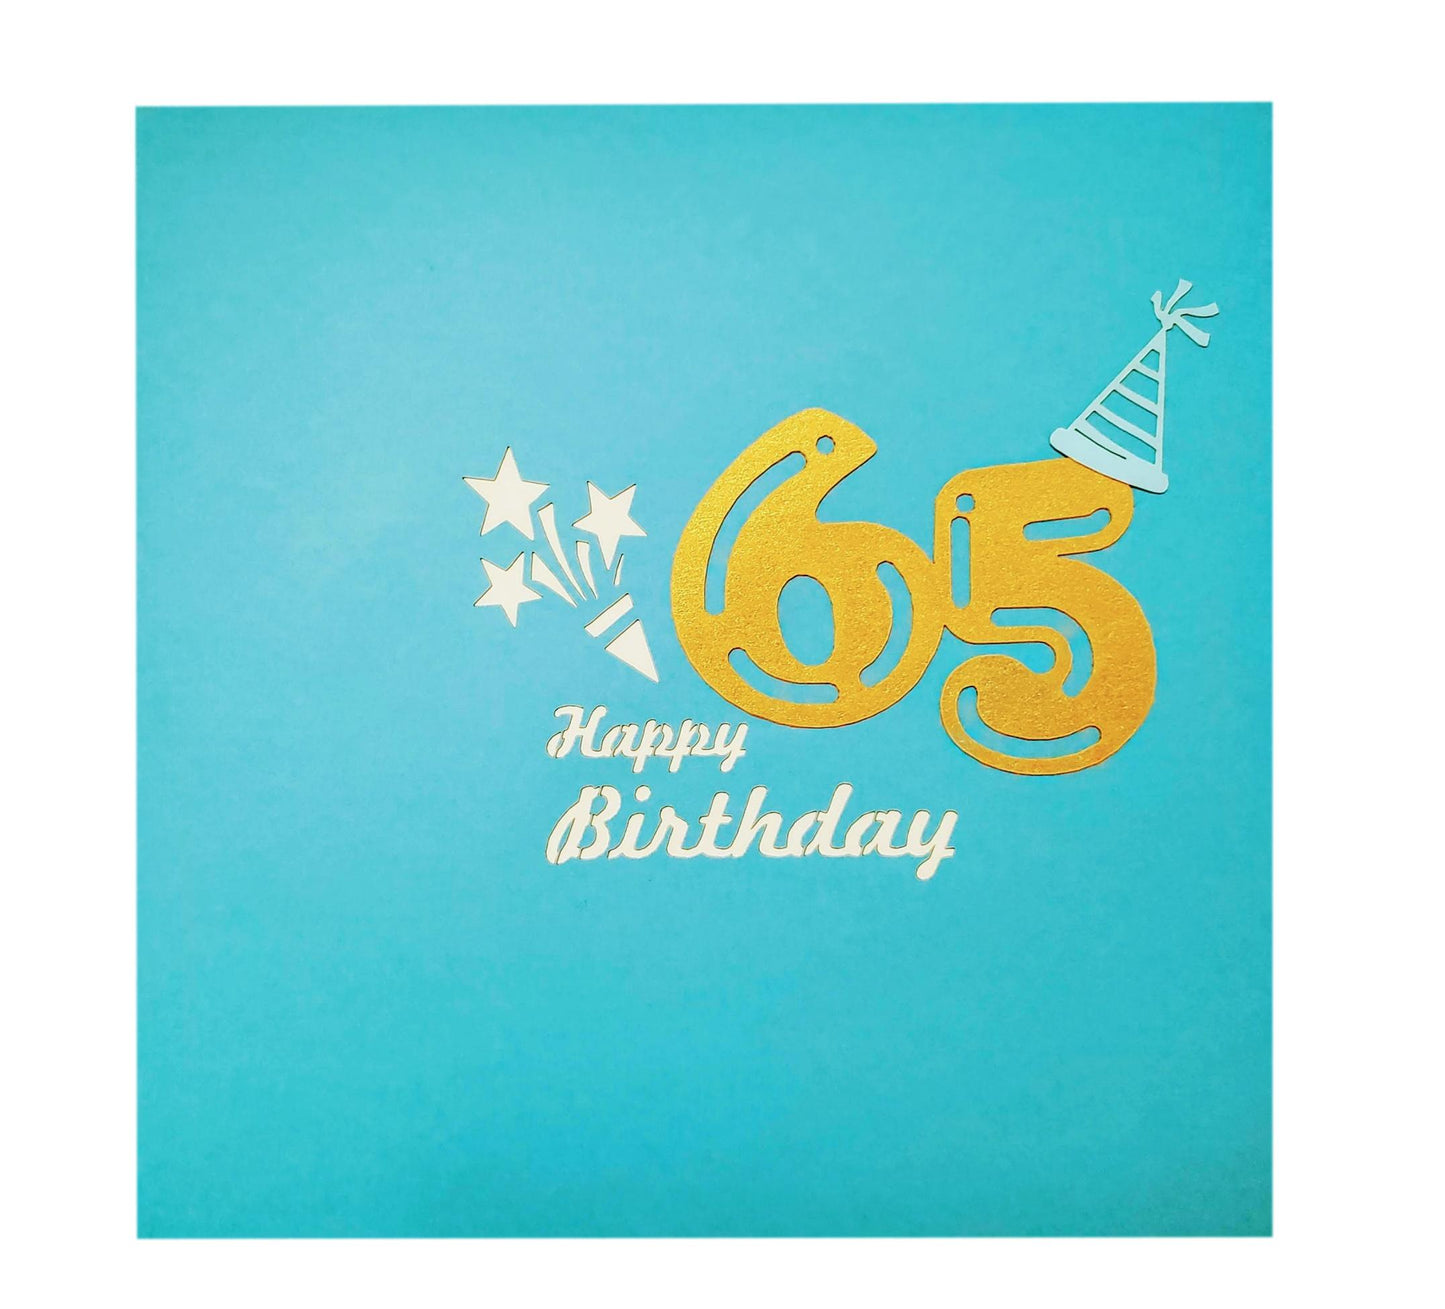 Happy 65th Birthday Blue Party Box 3D Pop Up Greeting Card -  - iGifts And Cards